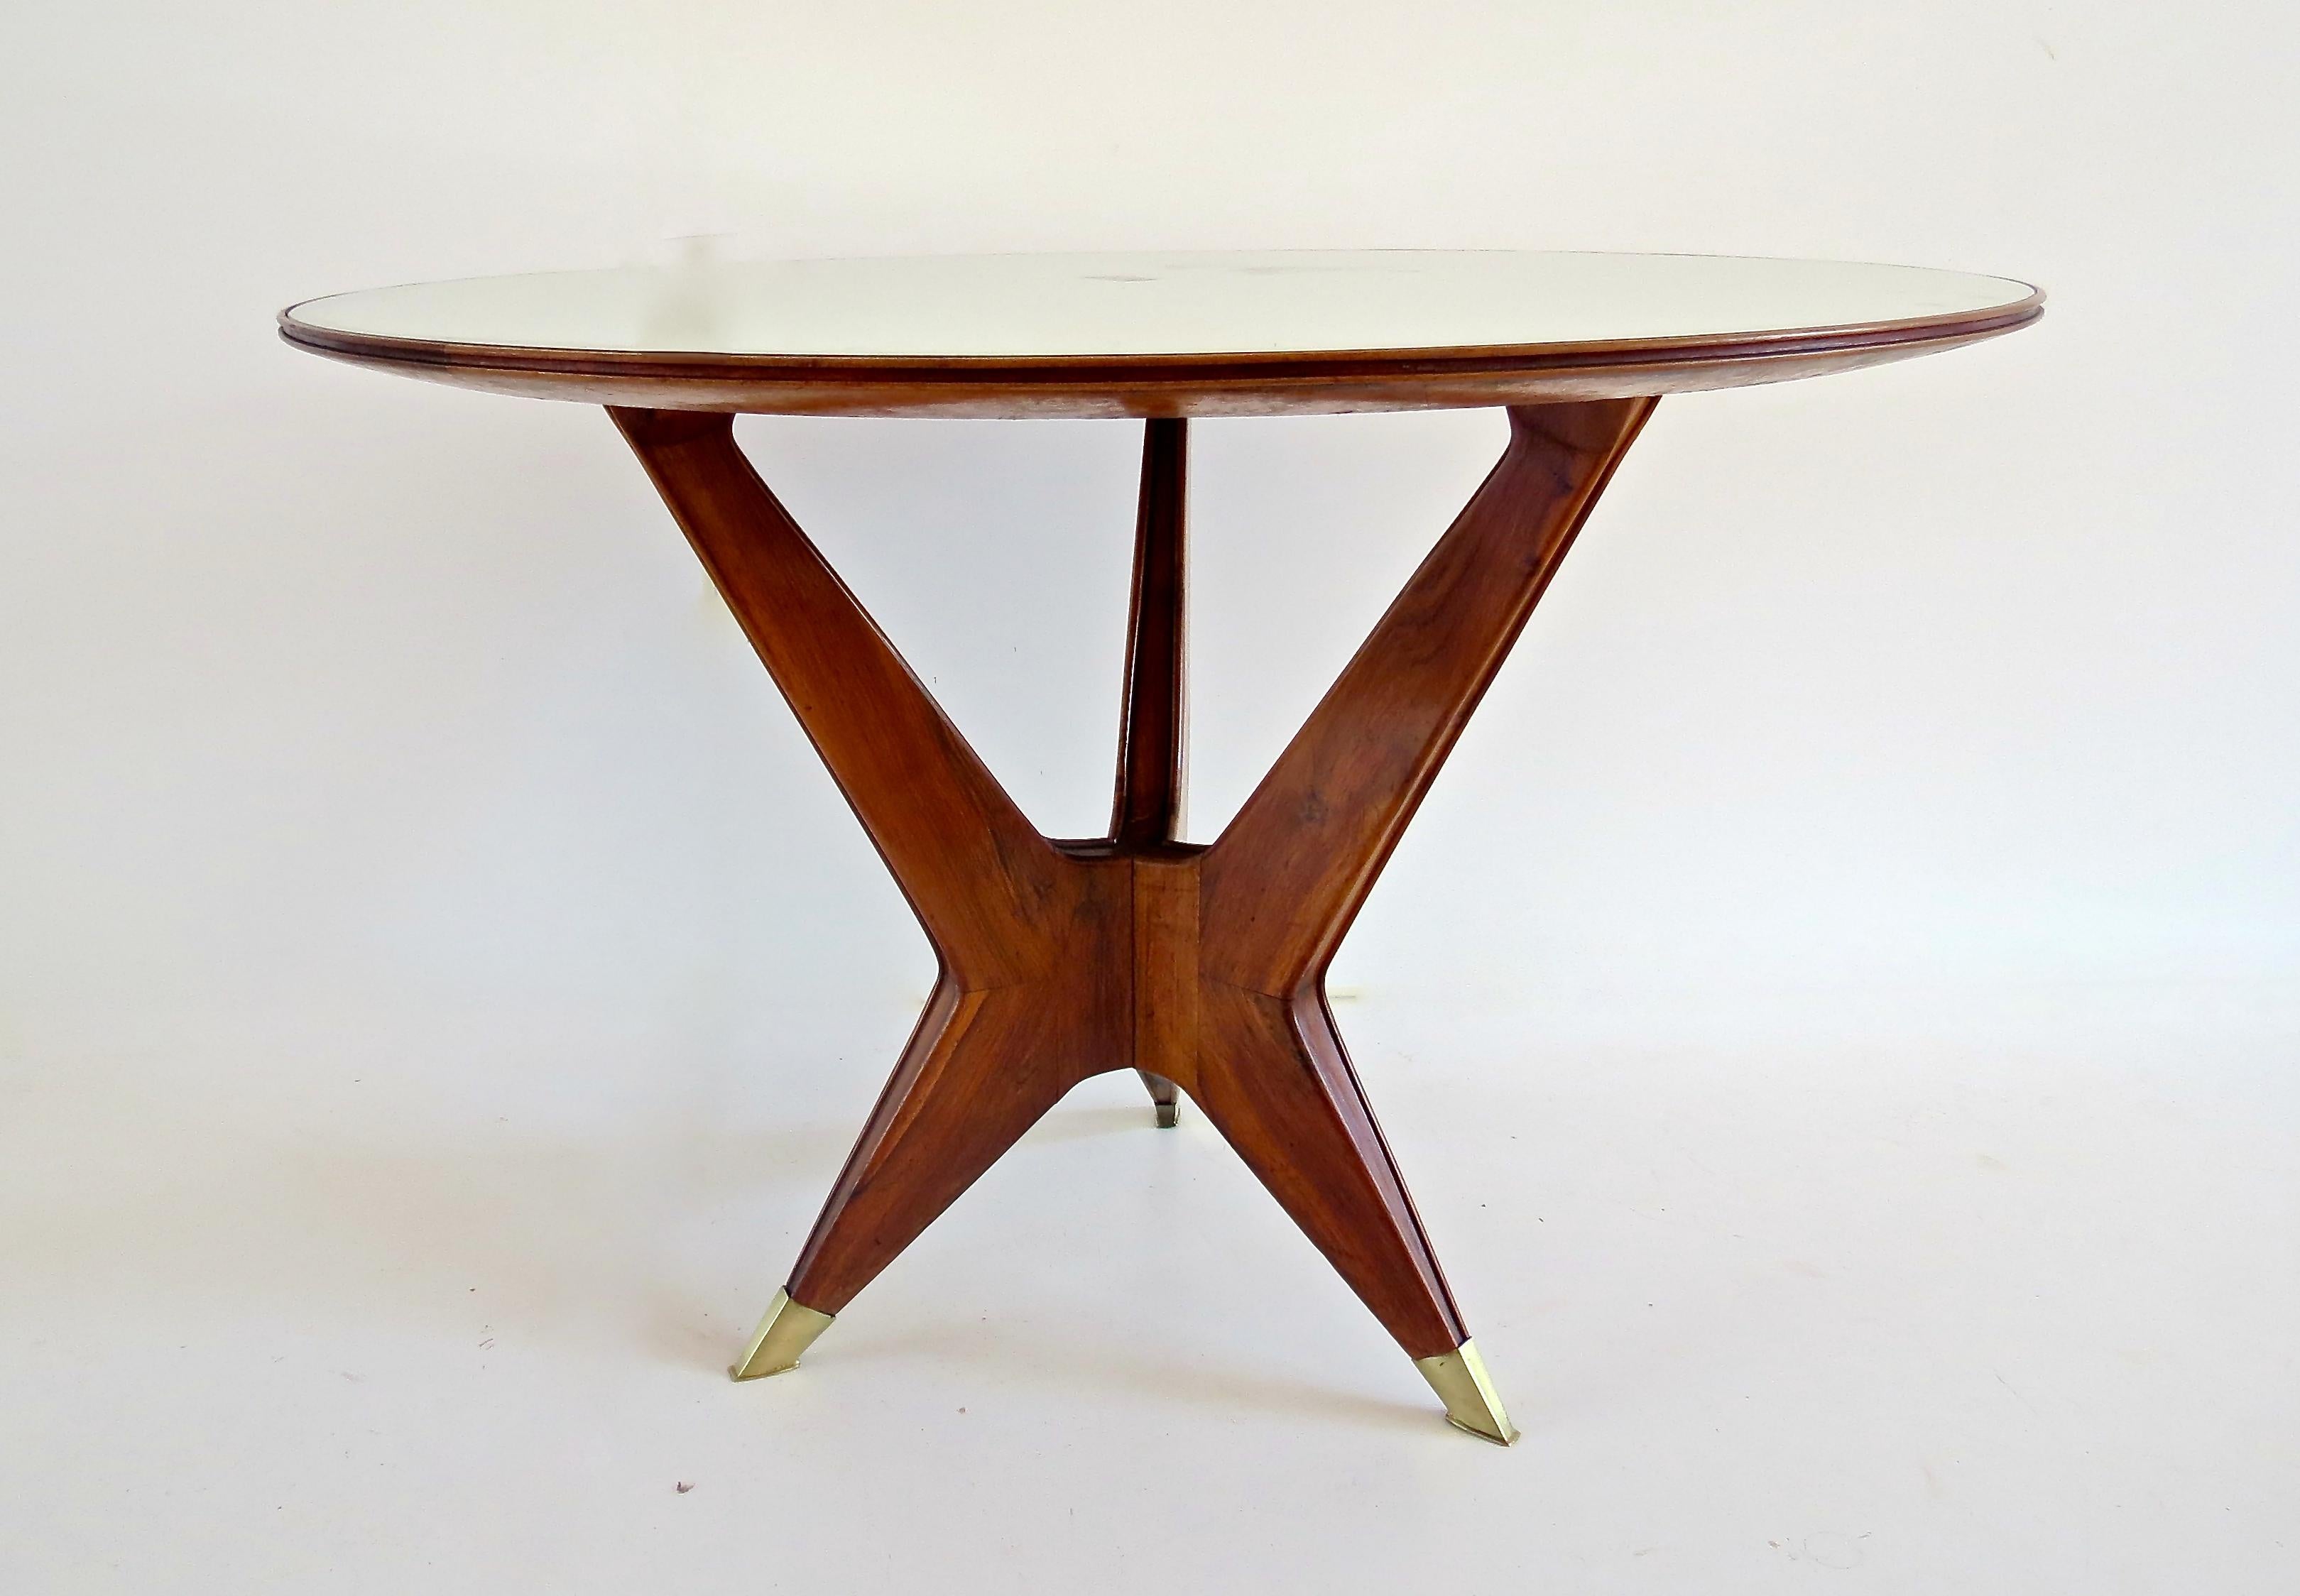 Important center or dining table in walnut and mirrored top, attributed to Arch. Ico Parisi
mirrored top; the mirror glass is not coeval at the table
walnut, mirror, brass
three feet, brass sabot
good condition
Measures: Diameter 114 cm, height